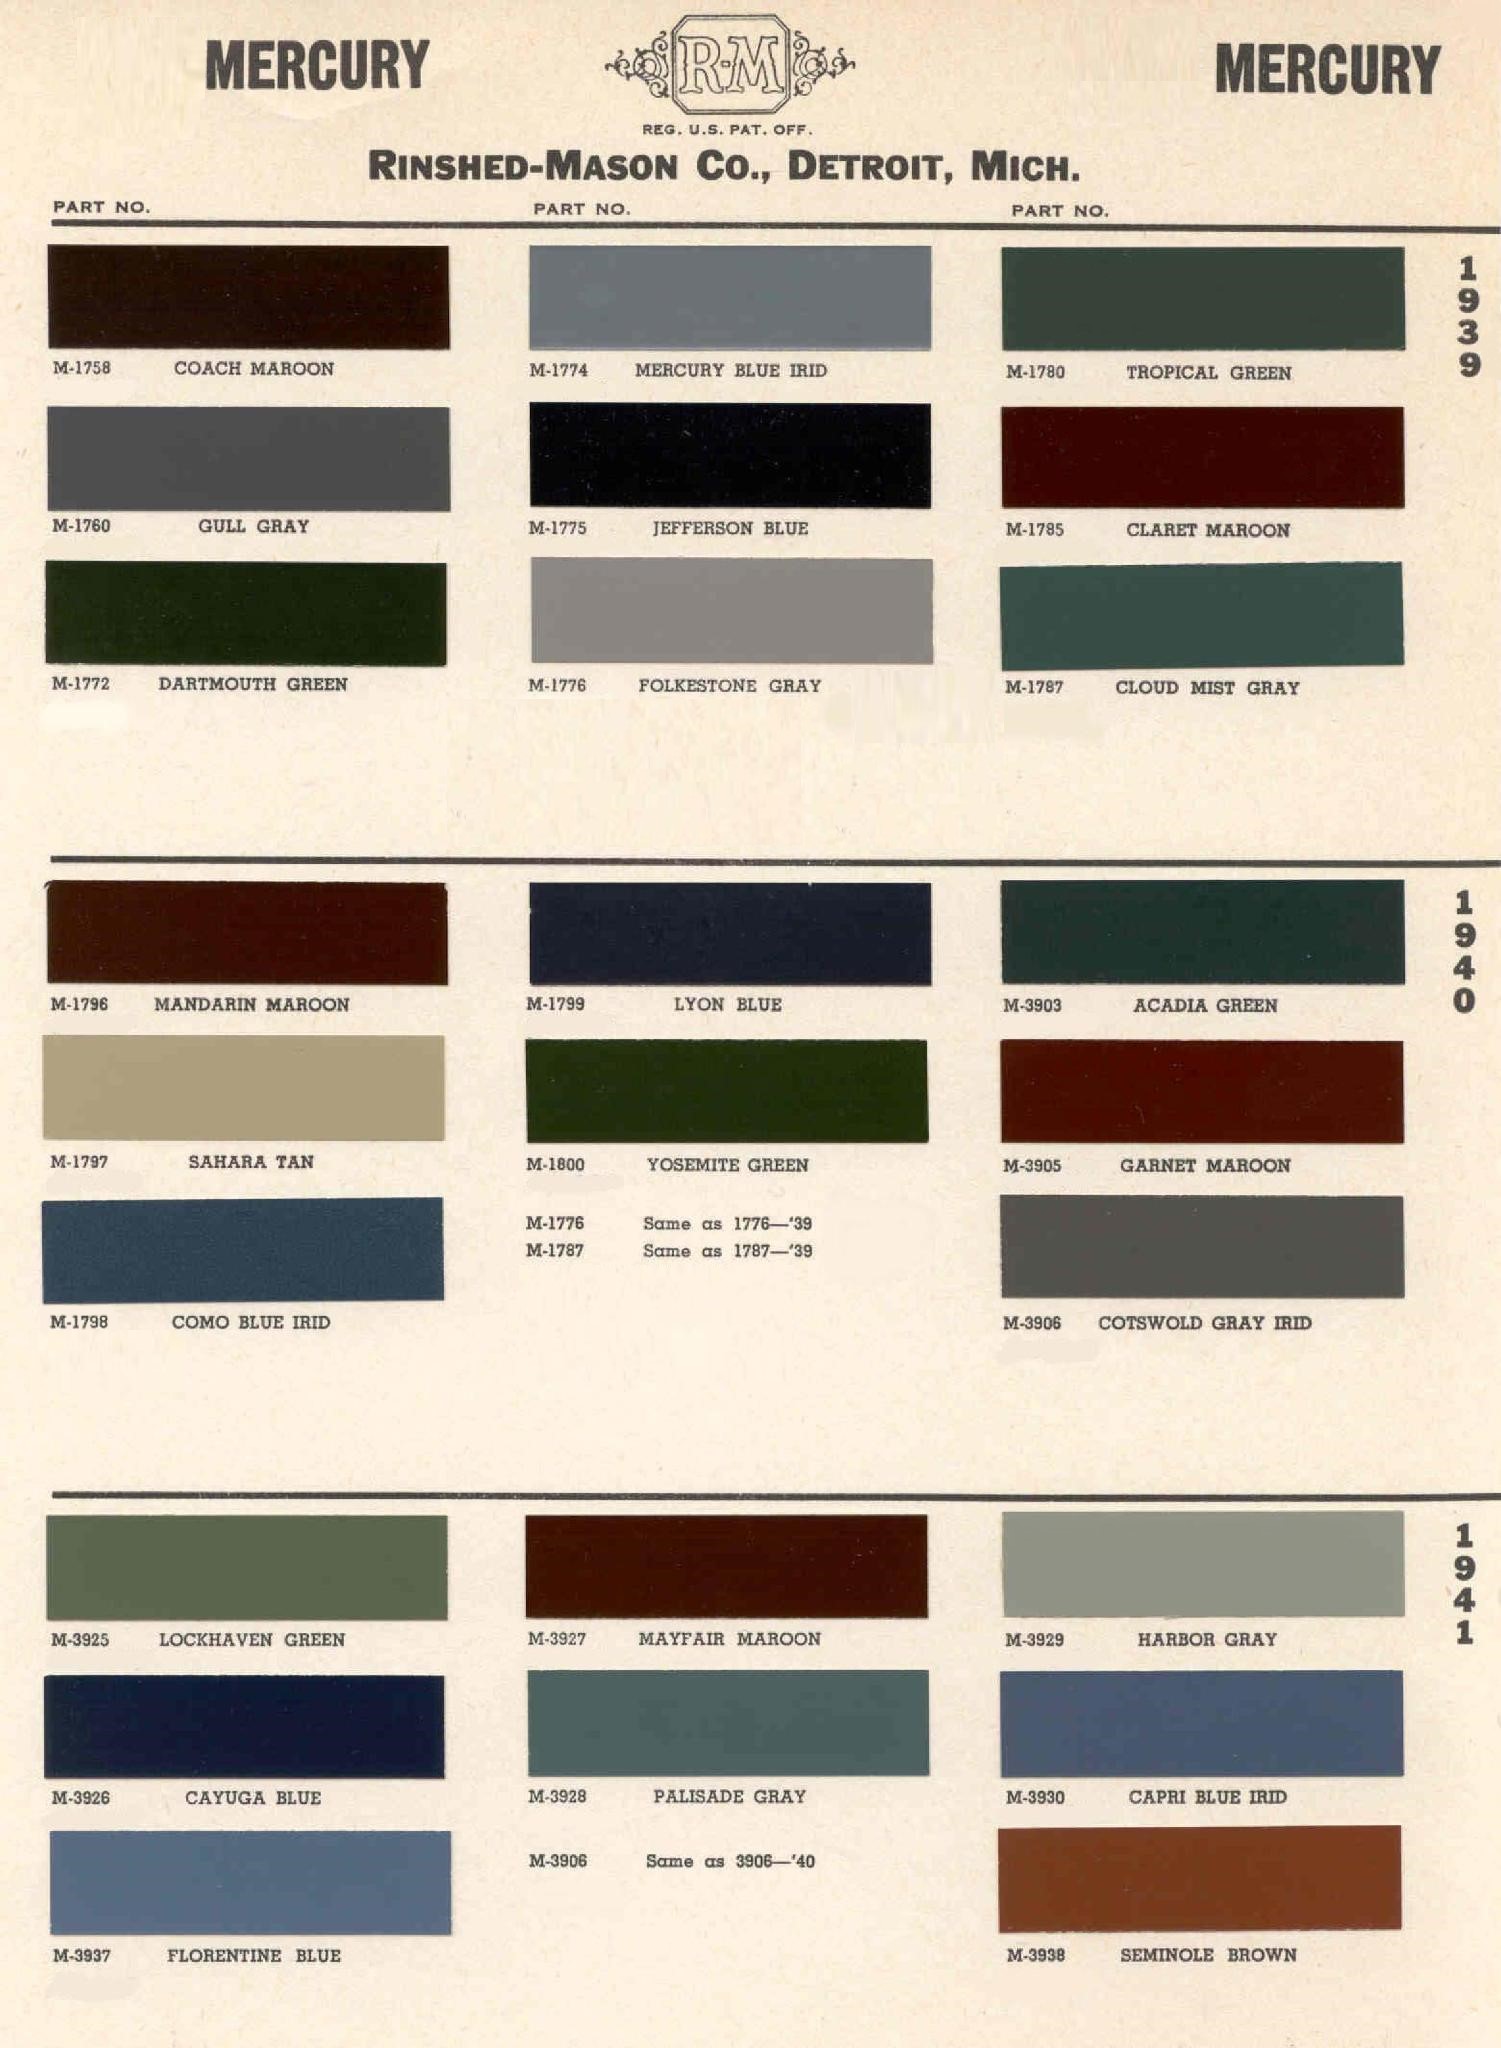 Paint Colors for Mercury Exterior Colors in 1939, 1940, 1941